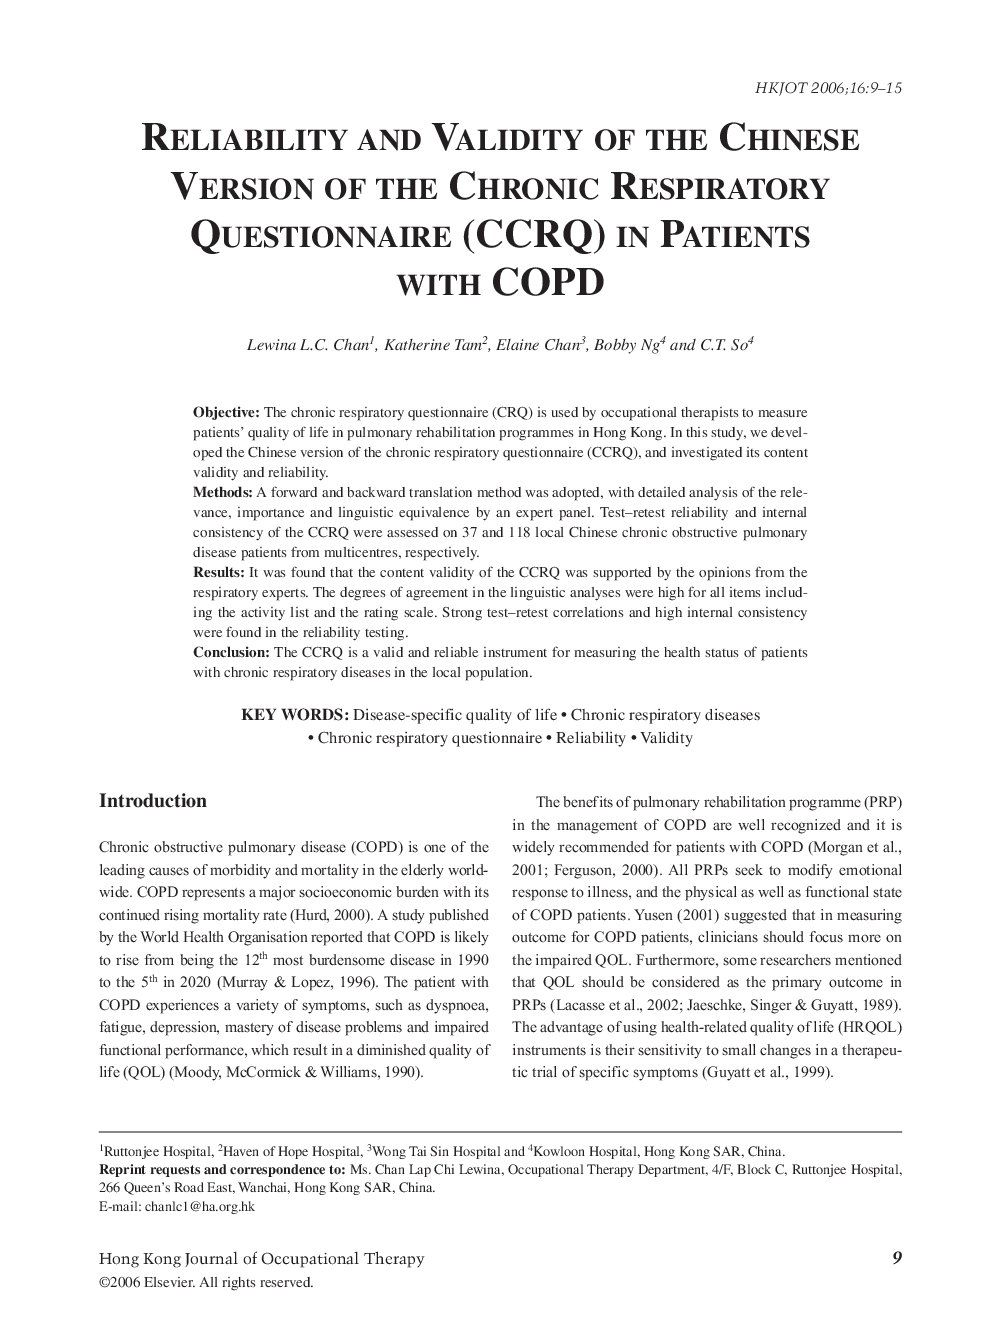 Reliability and Validity of the Chinese Version of the Chronic Respiratory Questionnaire (CCRQ) in Patients with COPD